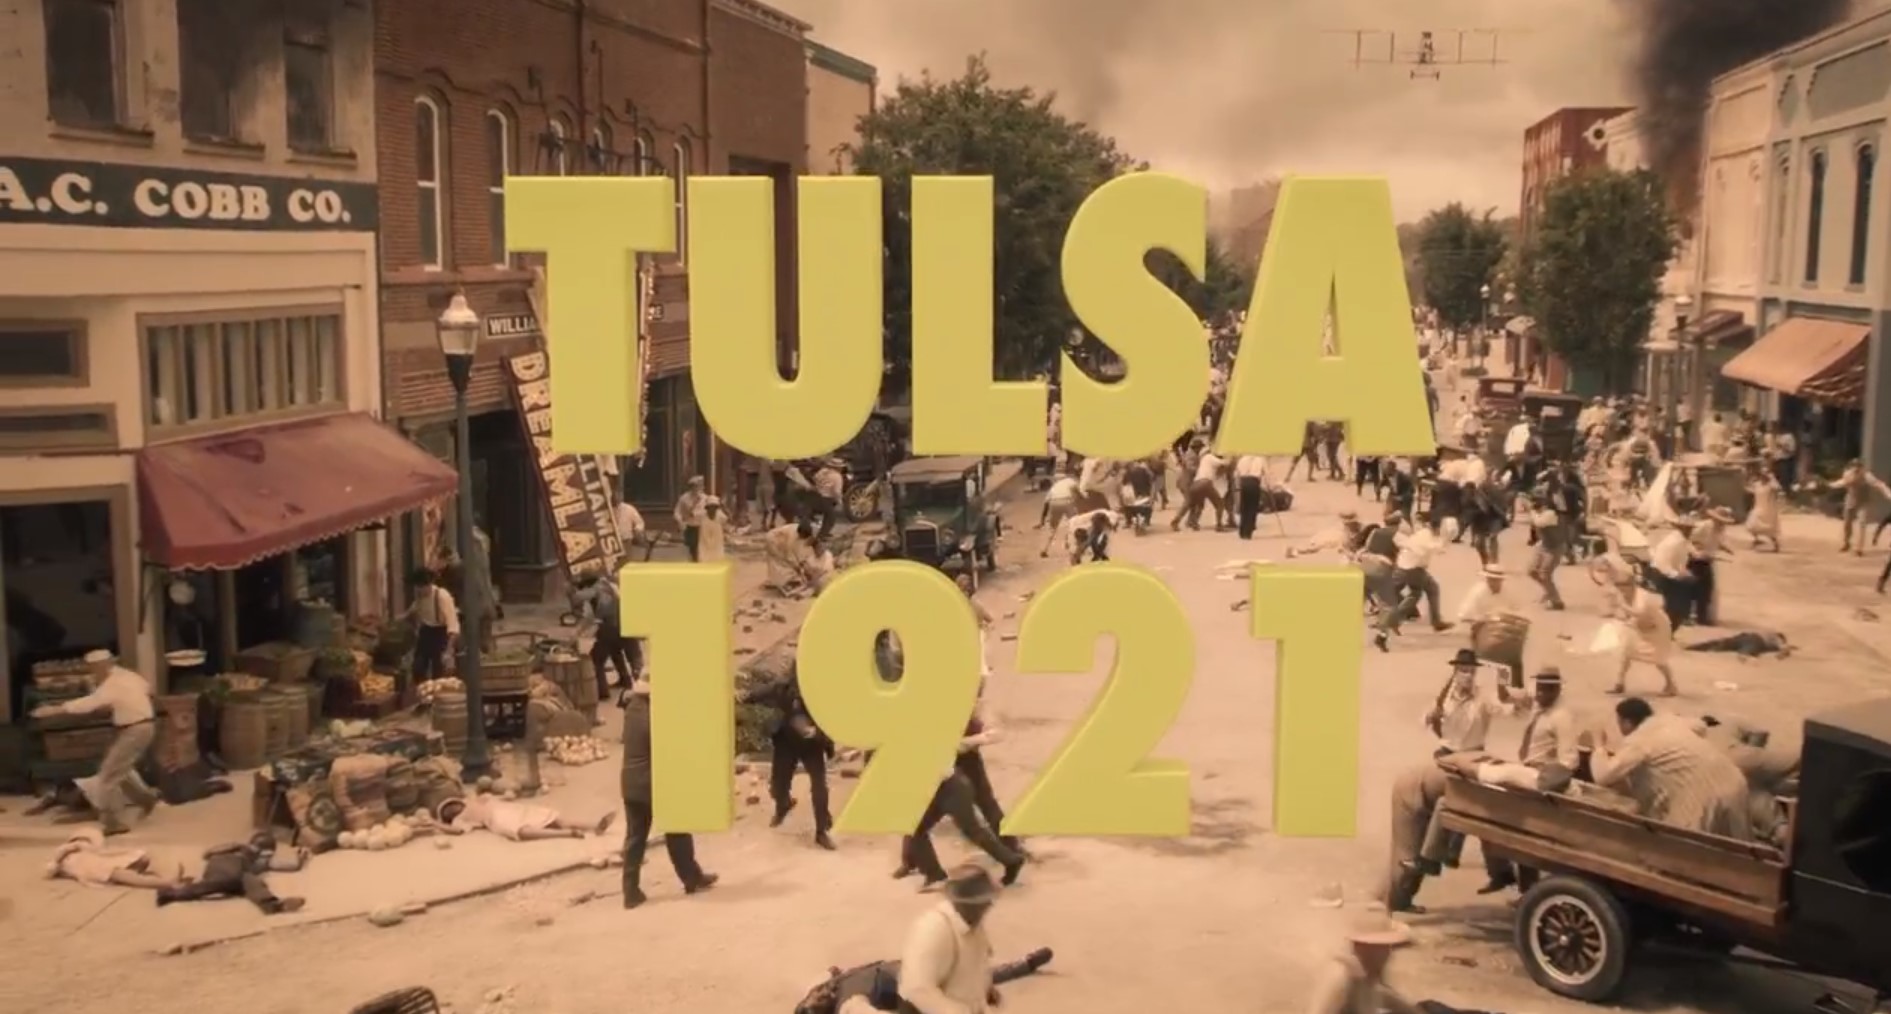 'Watchmen' on HBO: Was the Tulsa 1921 Massacre Real?